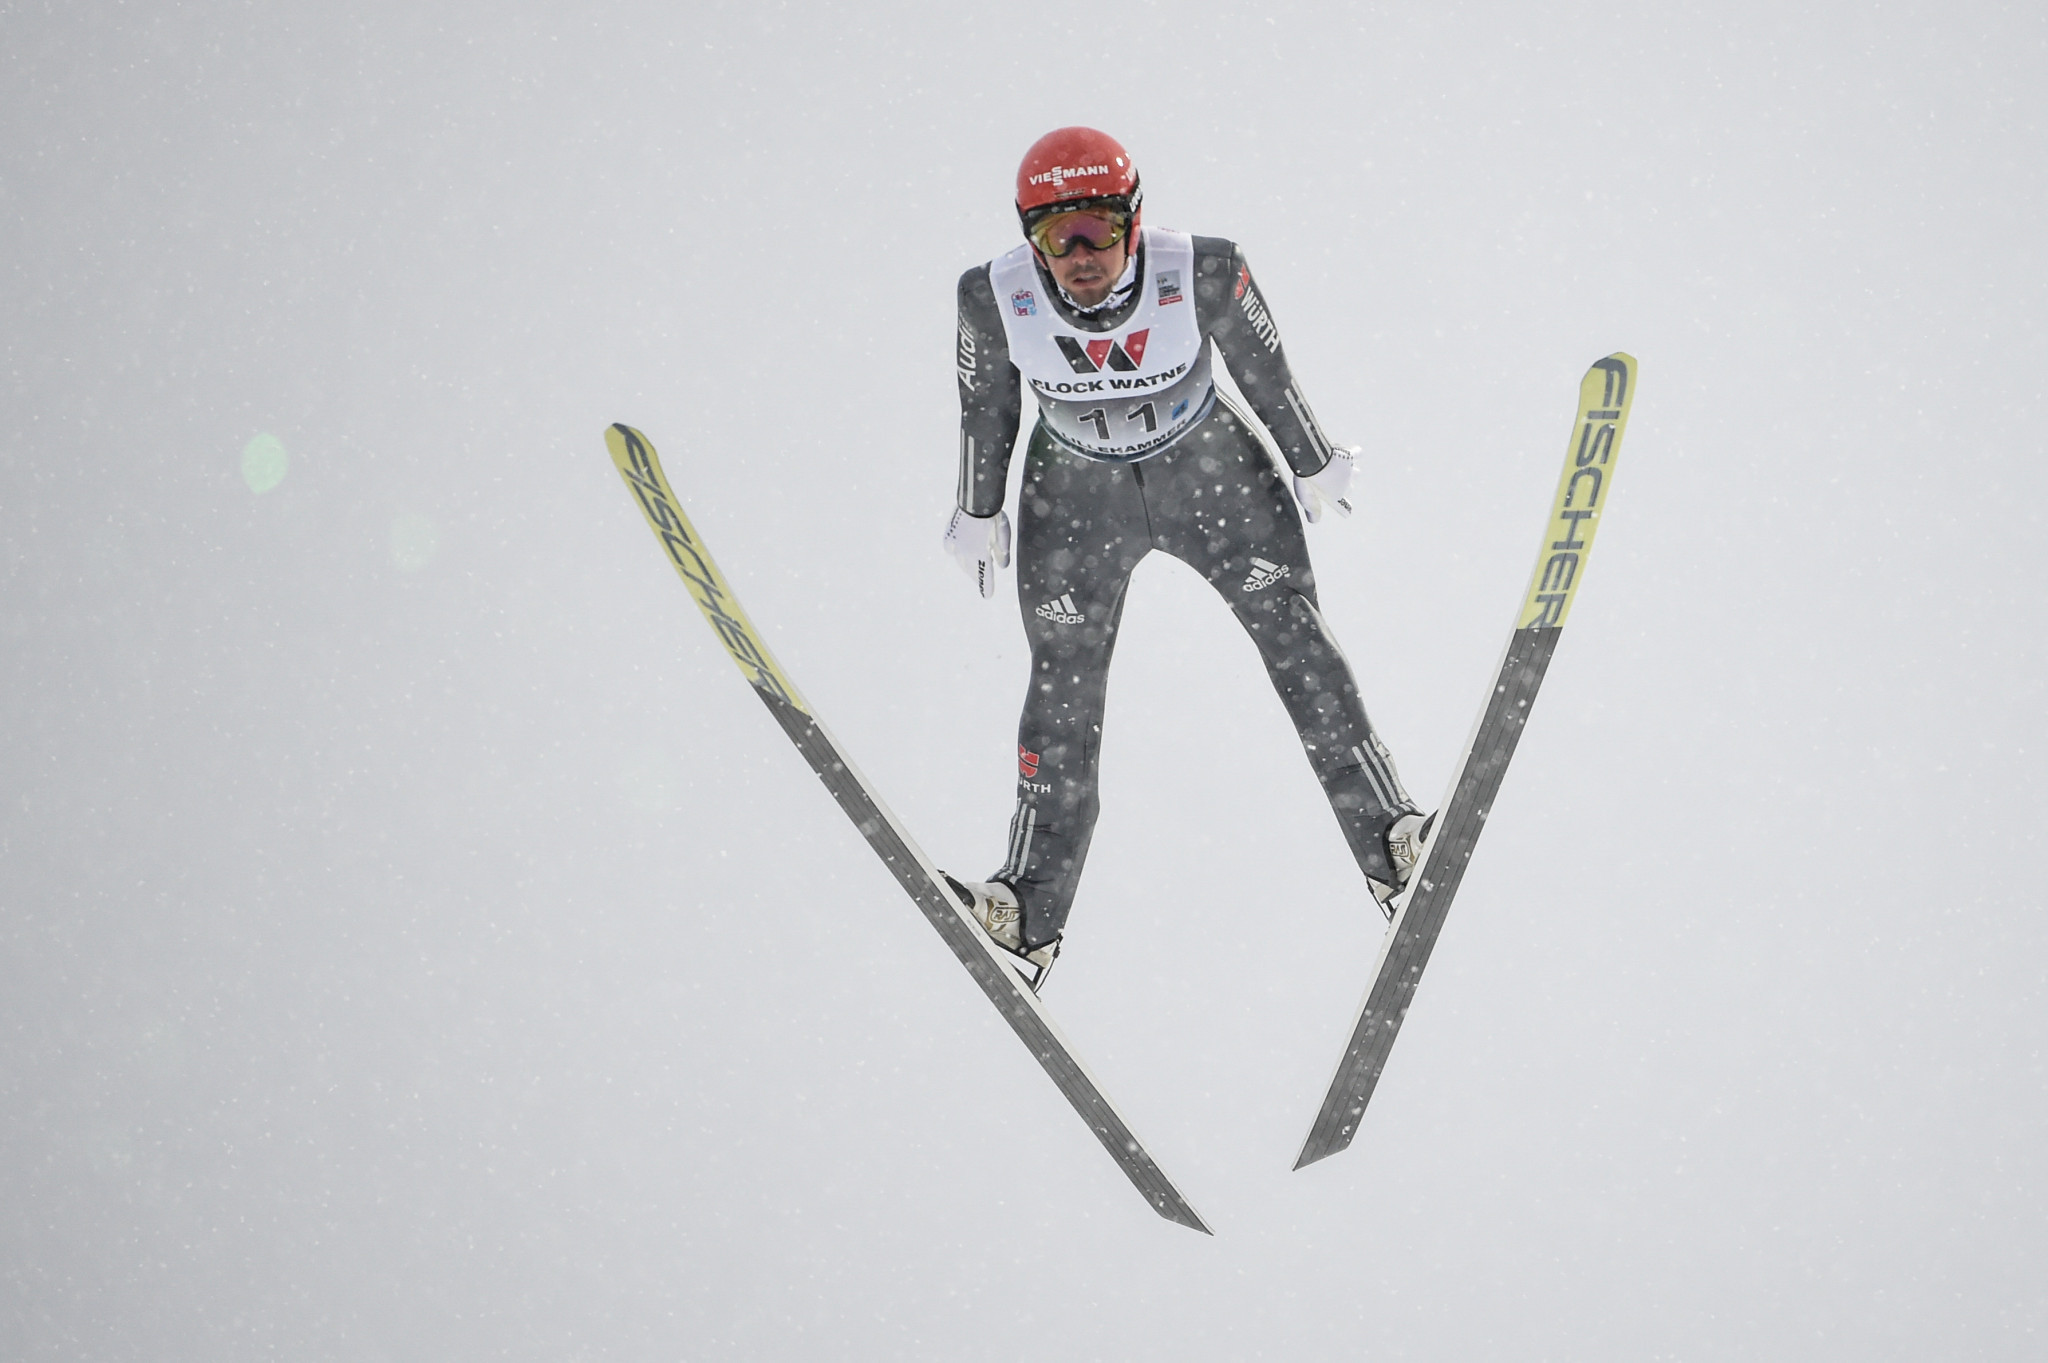 Men's Nordic combined has been held at the Winter Olympics since Chamonix 1924 but the women's discipline is not currently on the programme and failed in a bid for Beijing 2022 ©Getty Images